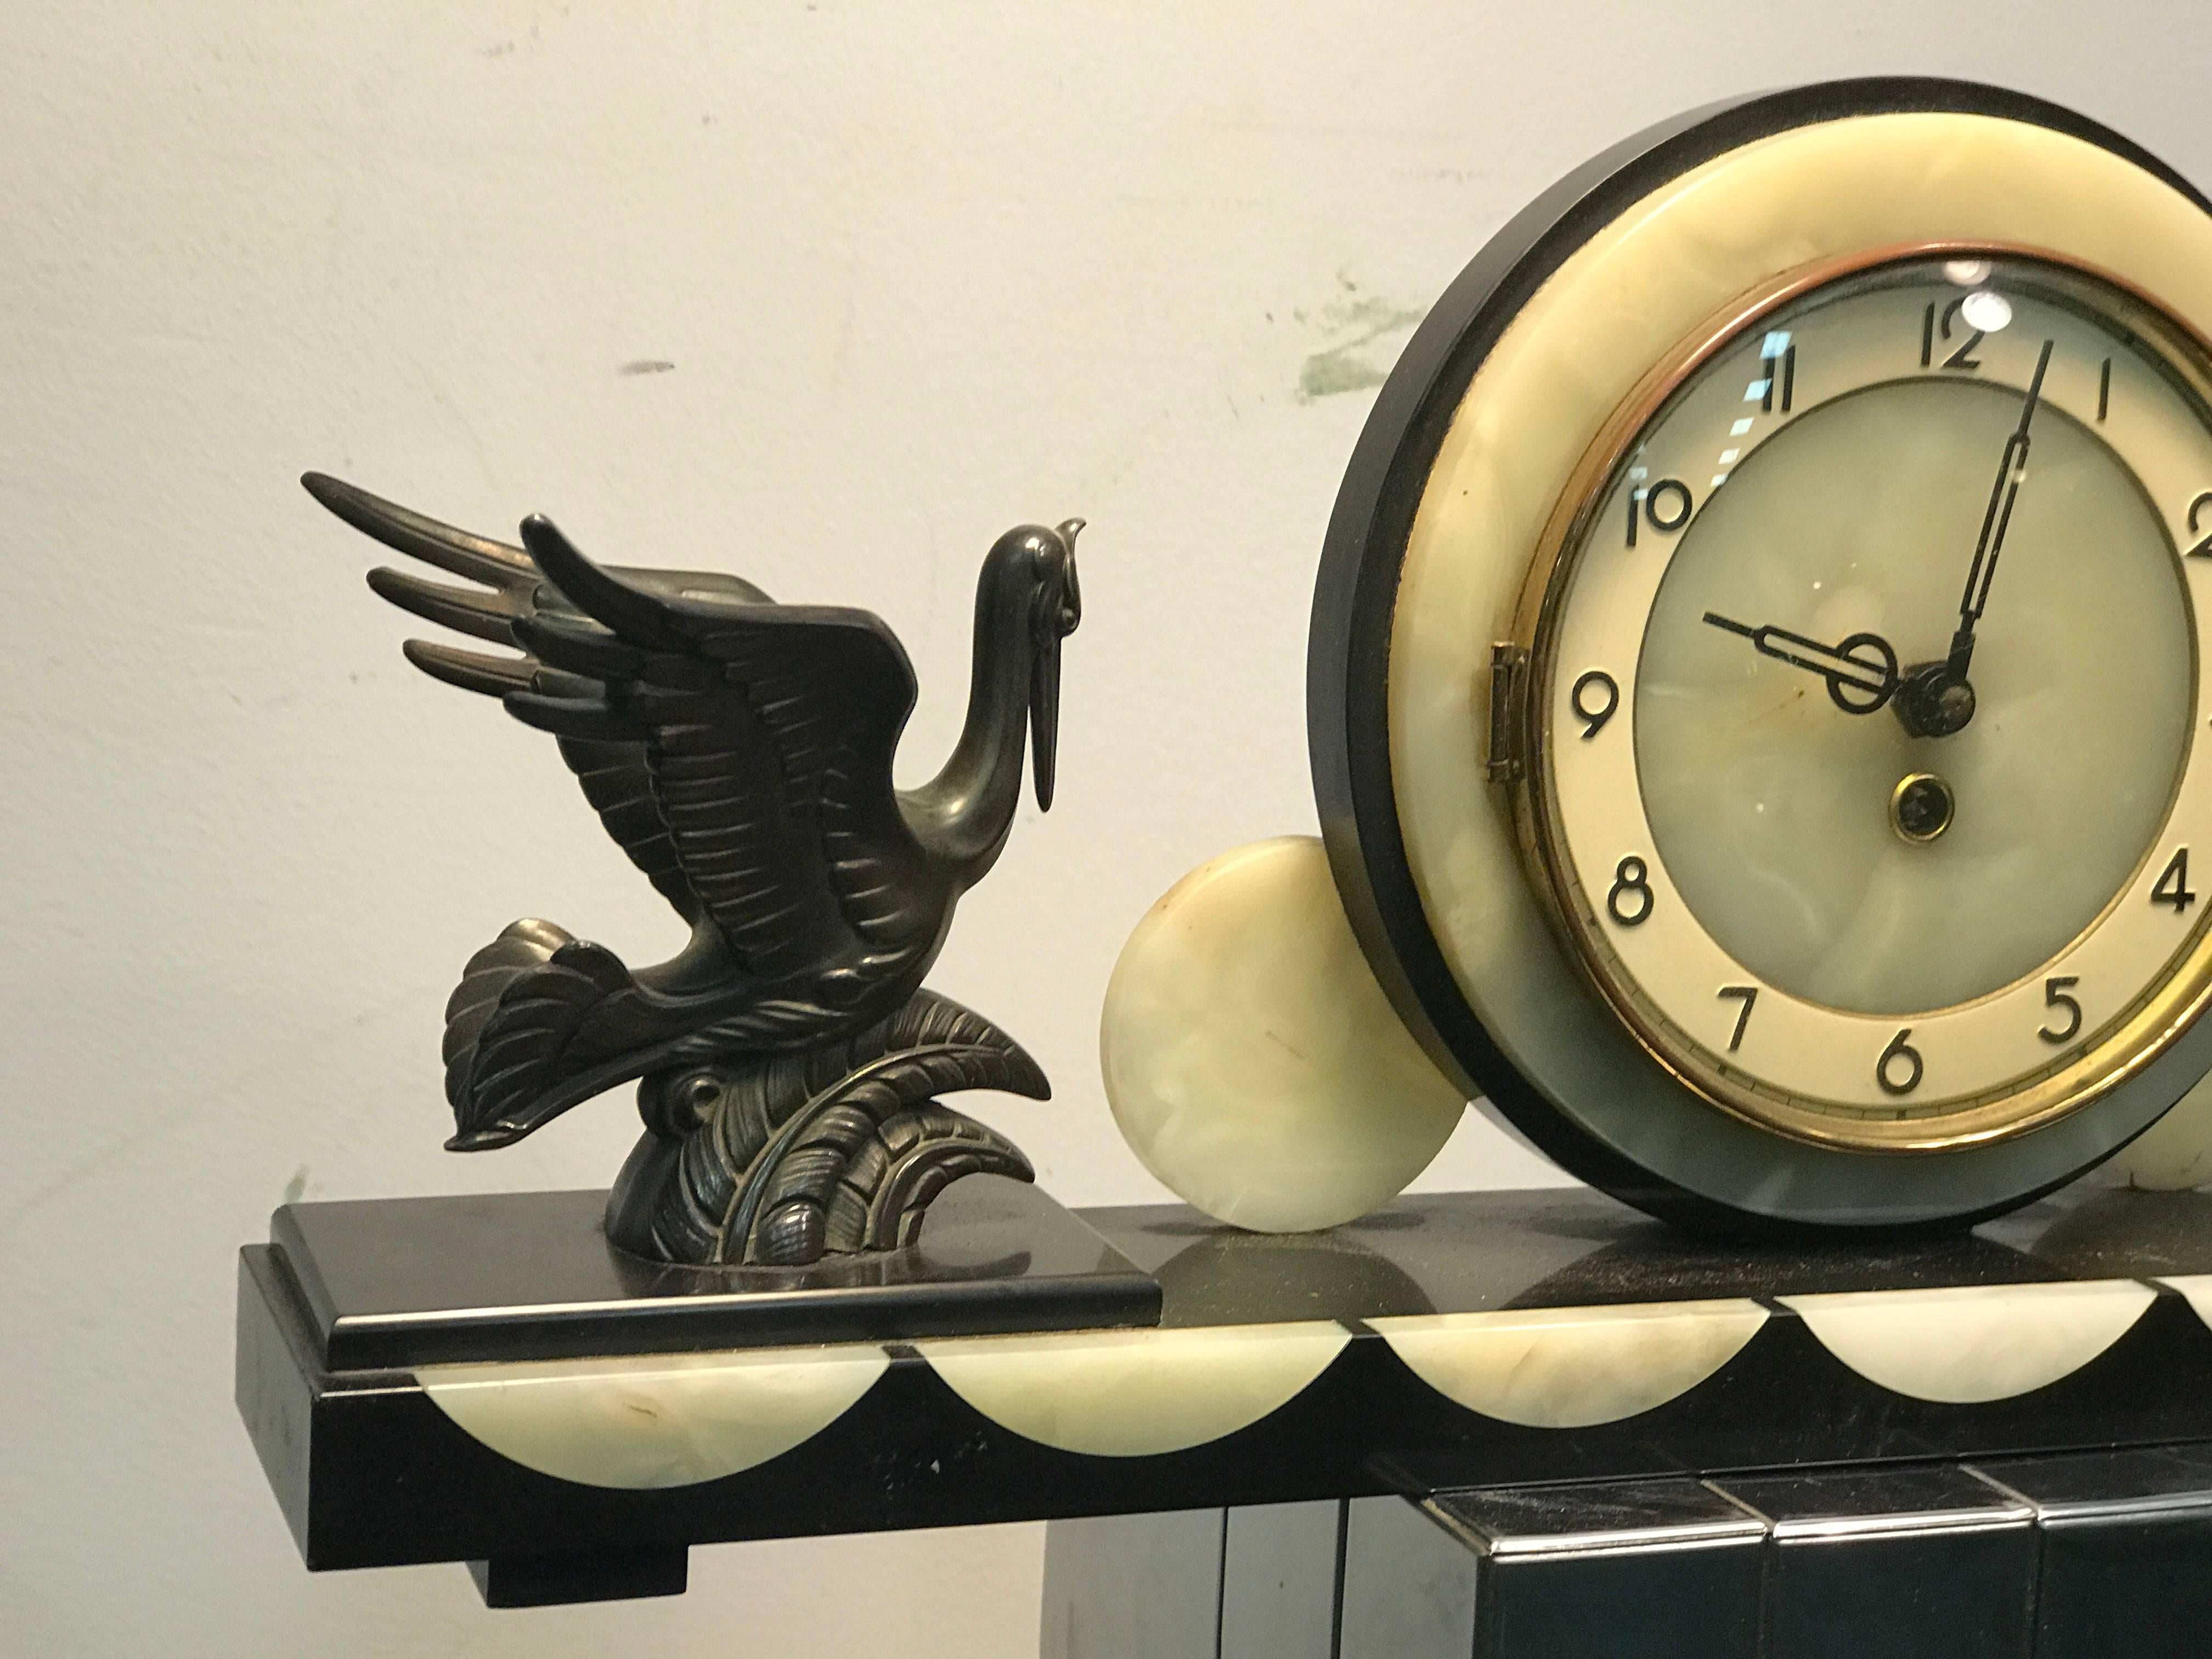 A beautiful French Art Deco marble and onyx mantel clock with white metal heron figurines, circa 1930. Good vintage condition with some wear appropriate with age.